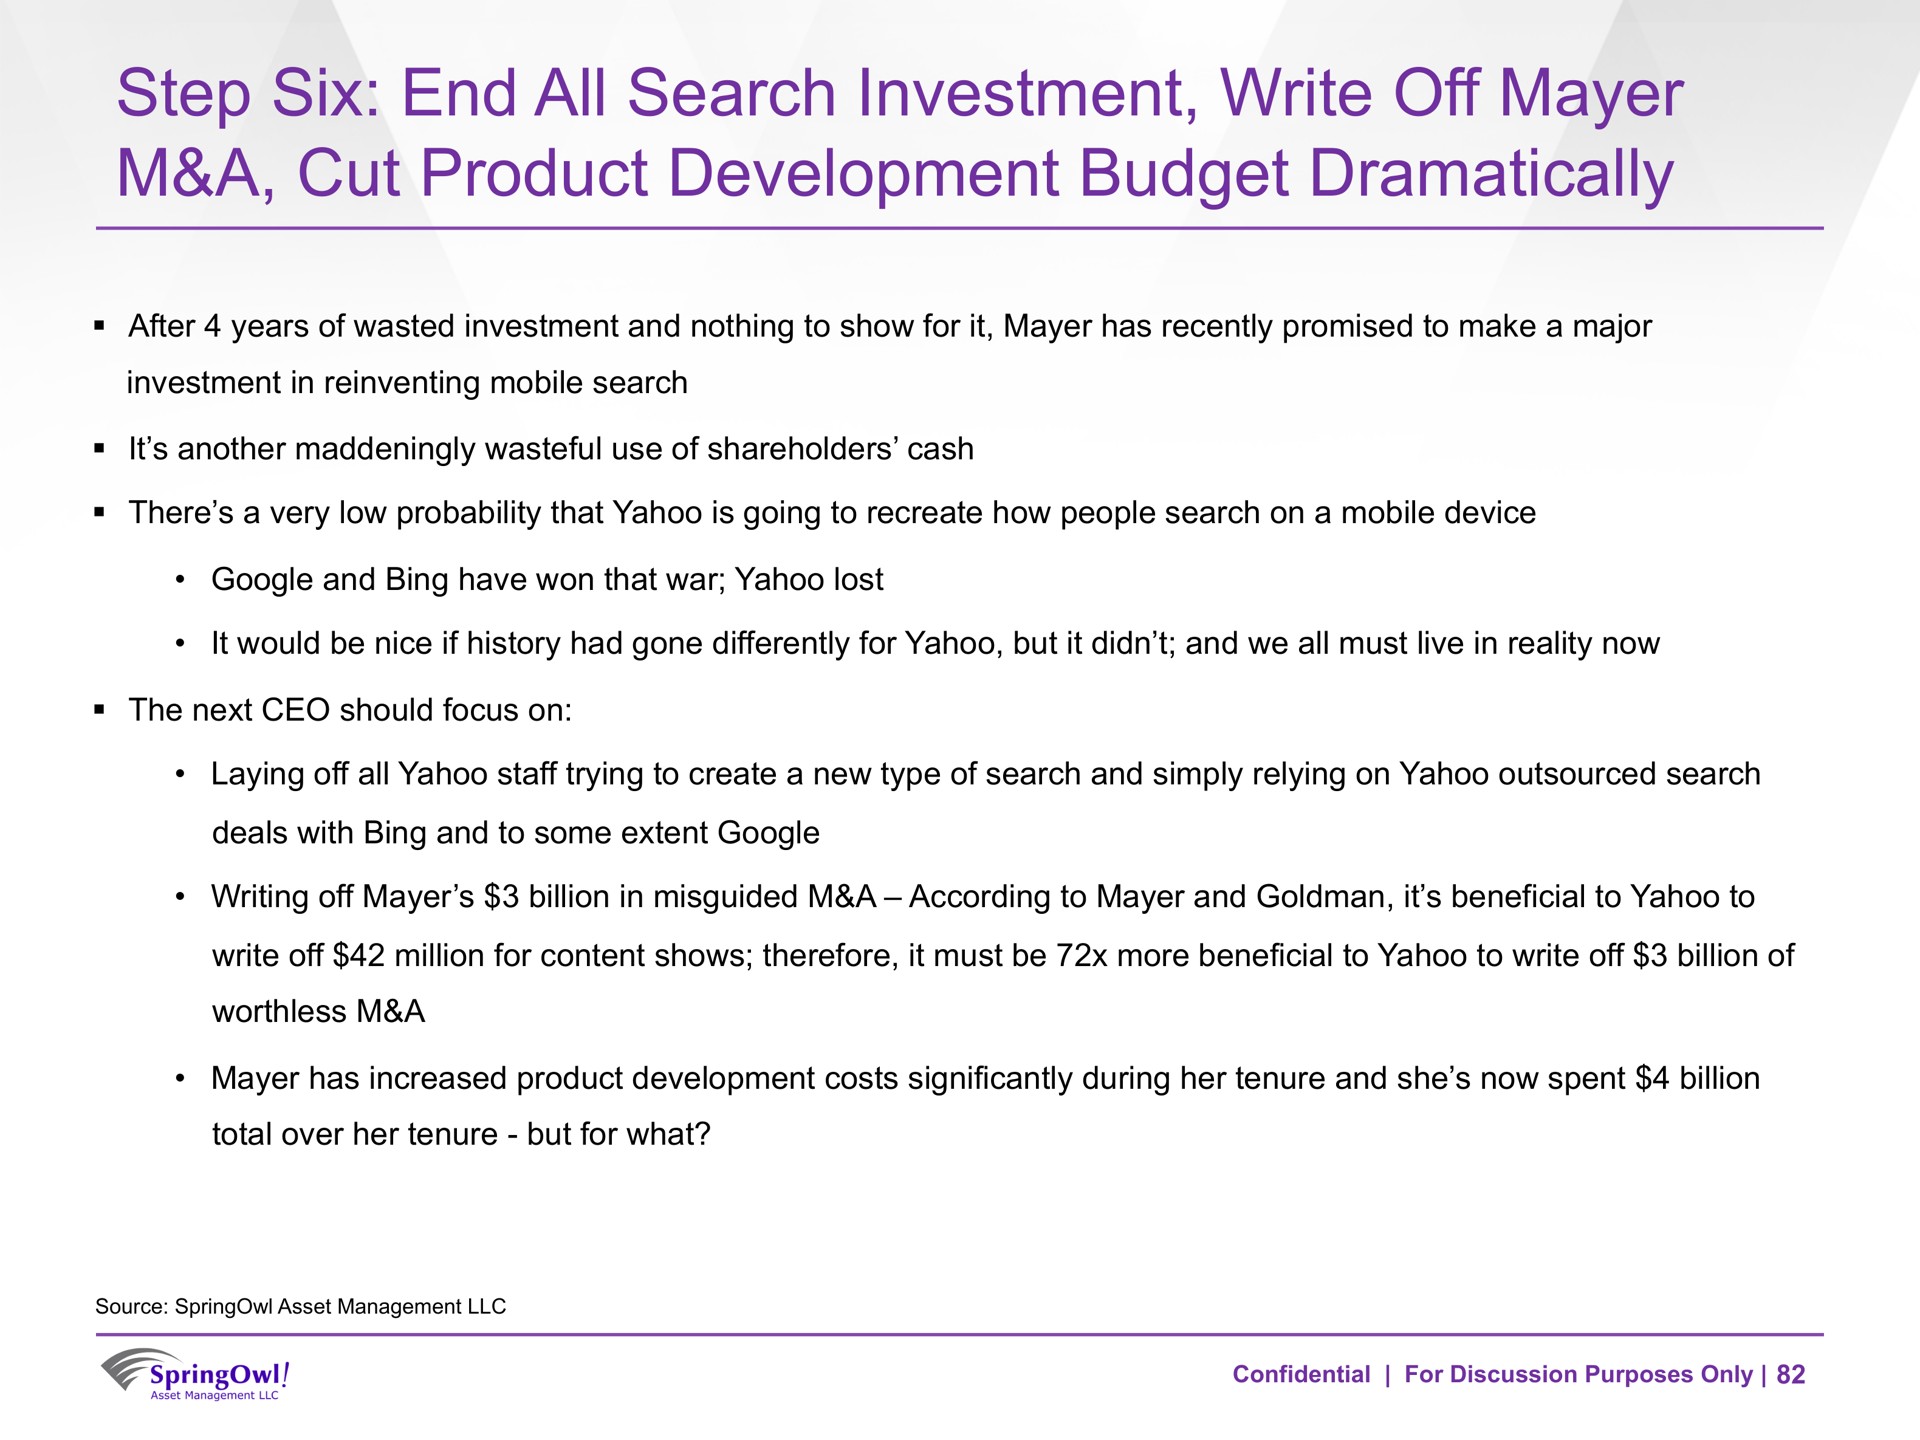 step six end all search investment write off a cut product development budget dramatically | SpringOwl